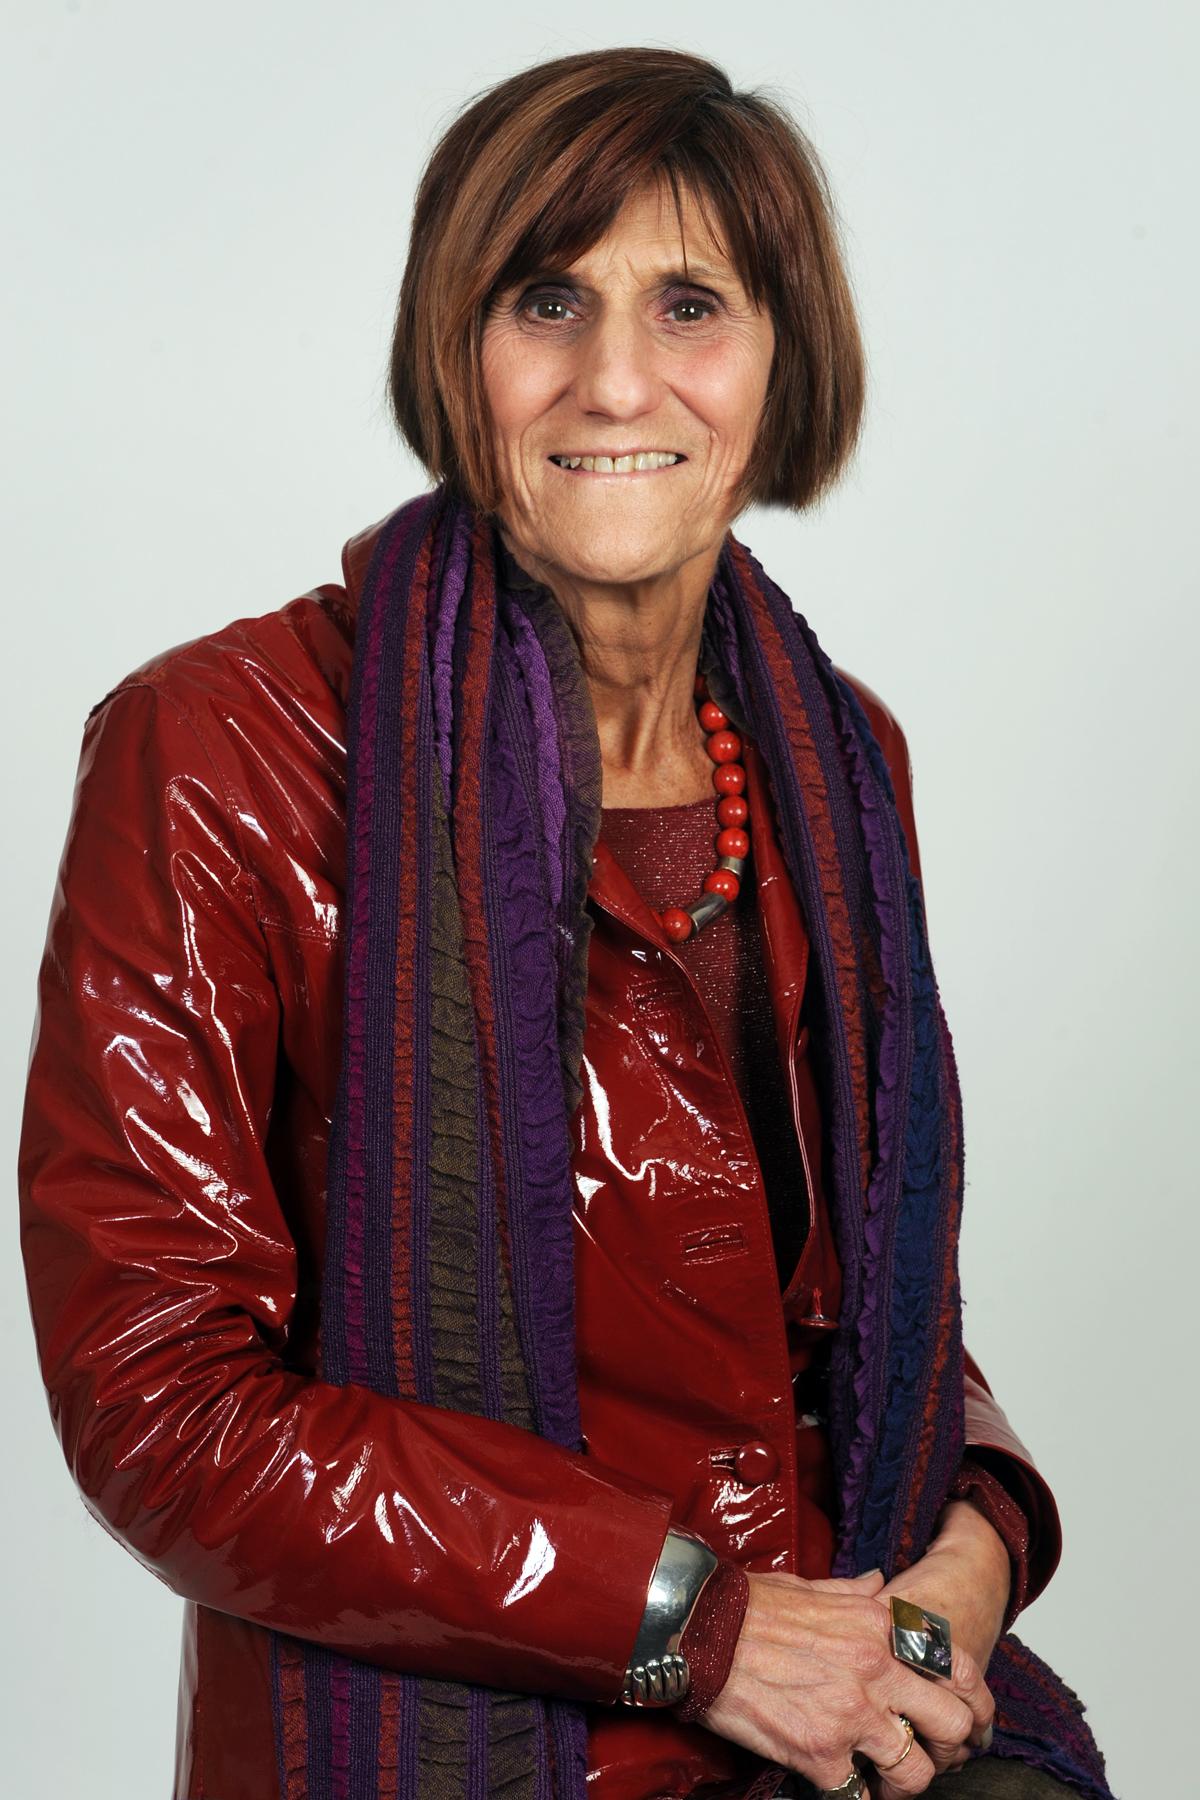 Endorsement: Rosa DeLauro deserves the right to continue her work